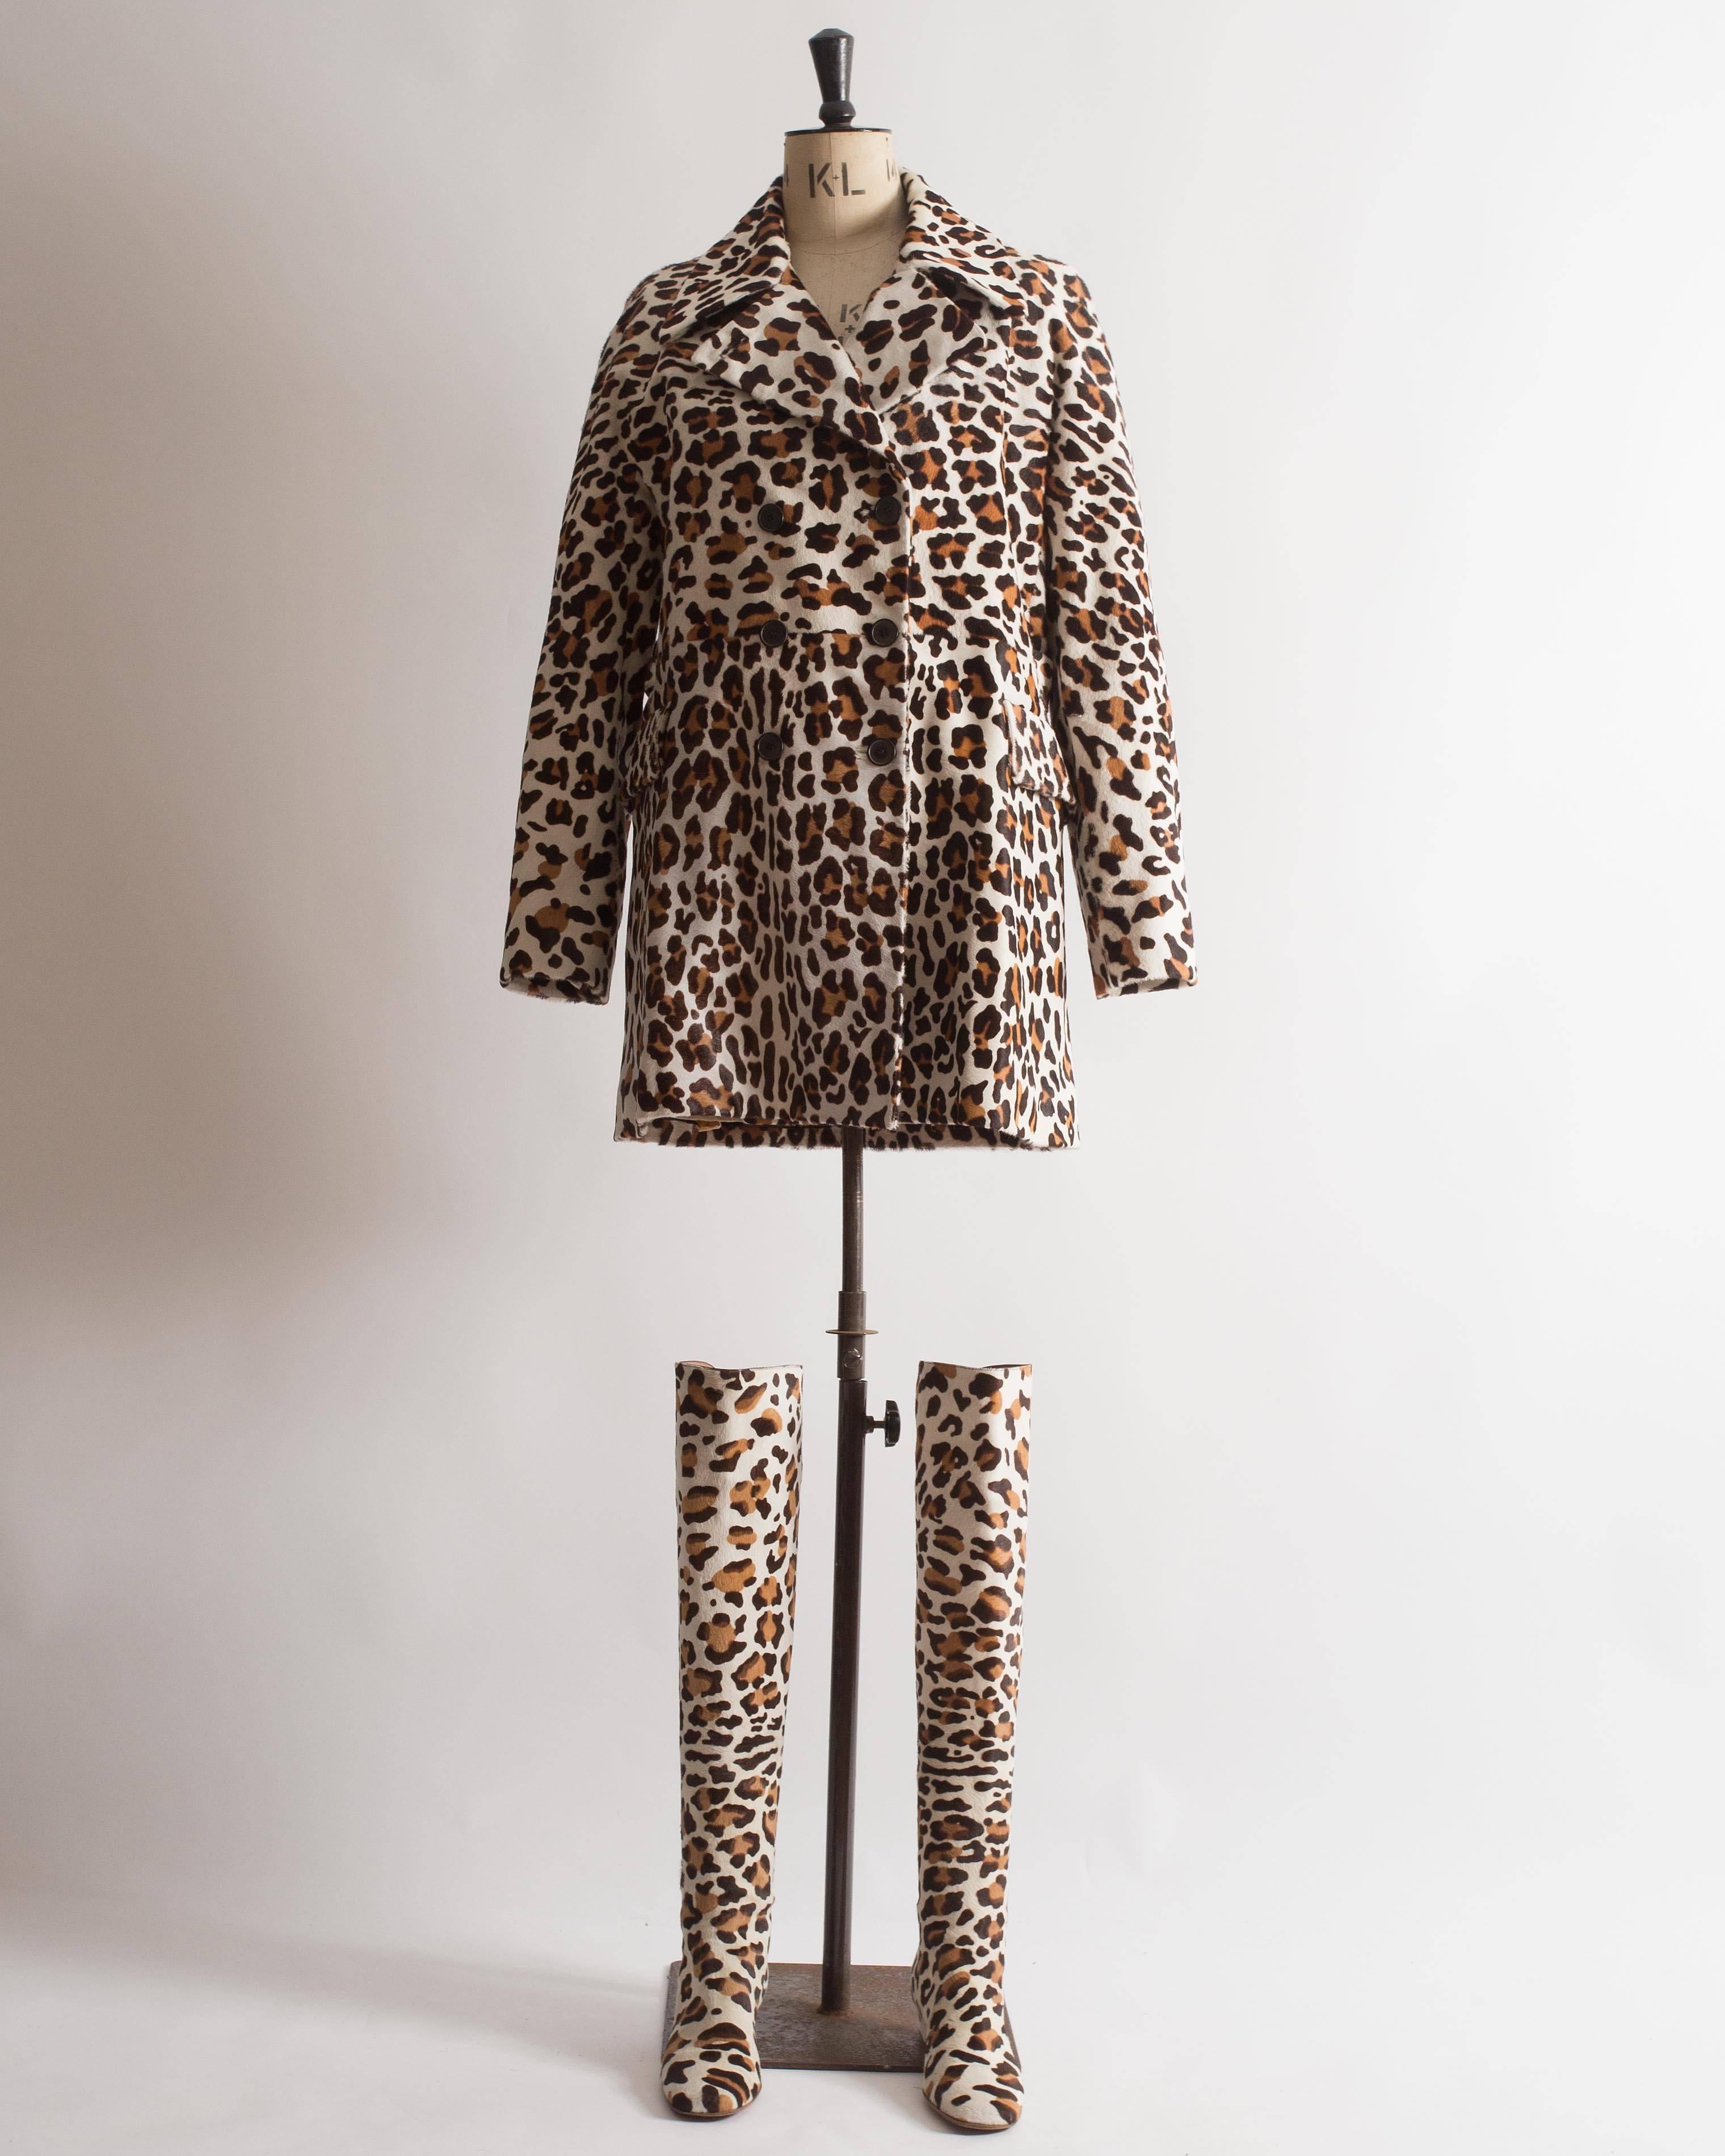 Introducing an extraordinary Alaia pony hair leopard print coat and boots ensemble, a true statement of bold and luxurious style. This ensemble showcases the brand's impeccable tailoring and daring design.

The coat features a notch collar, adding a